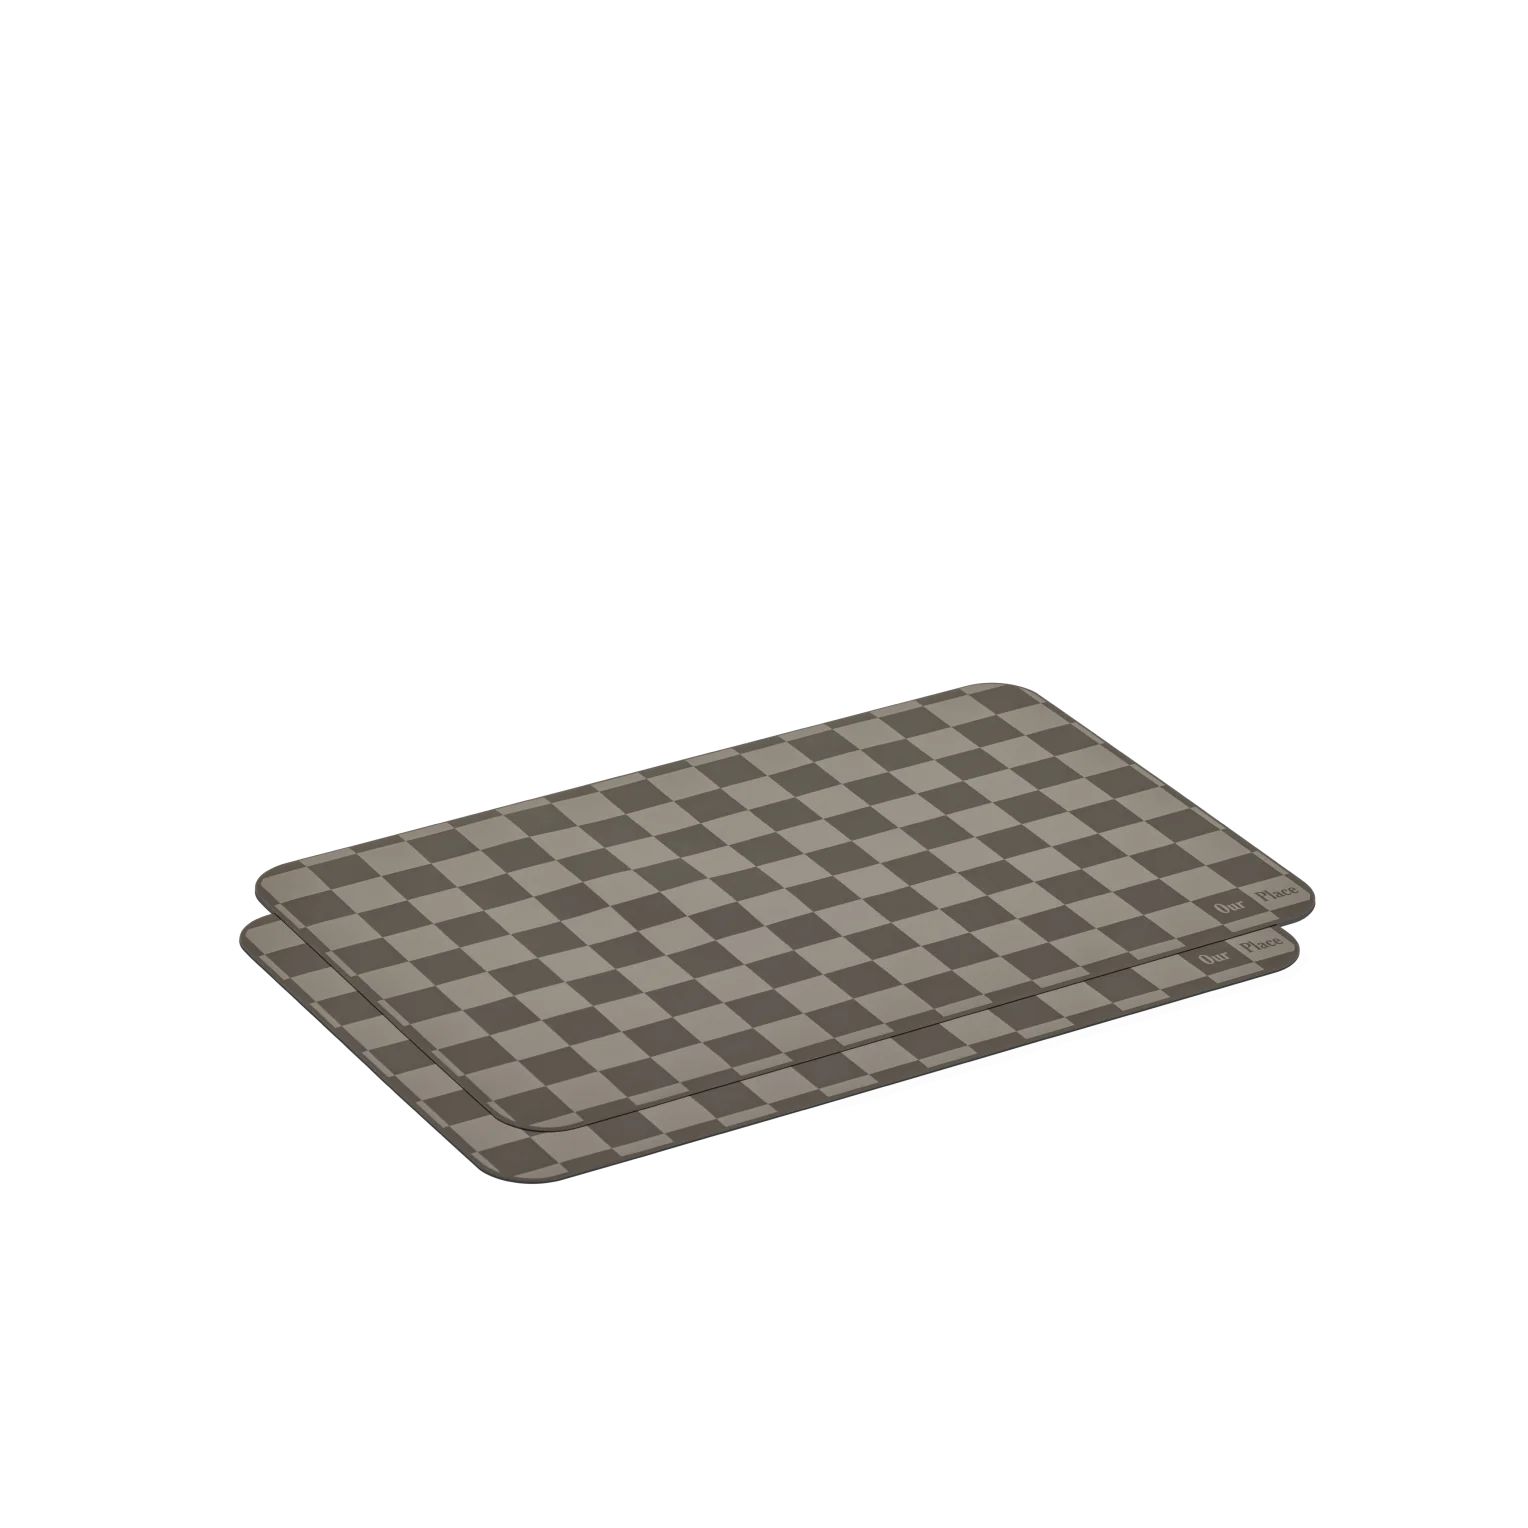 Oven Mats | Our Place